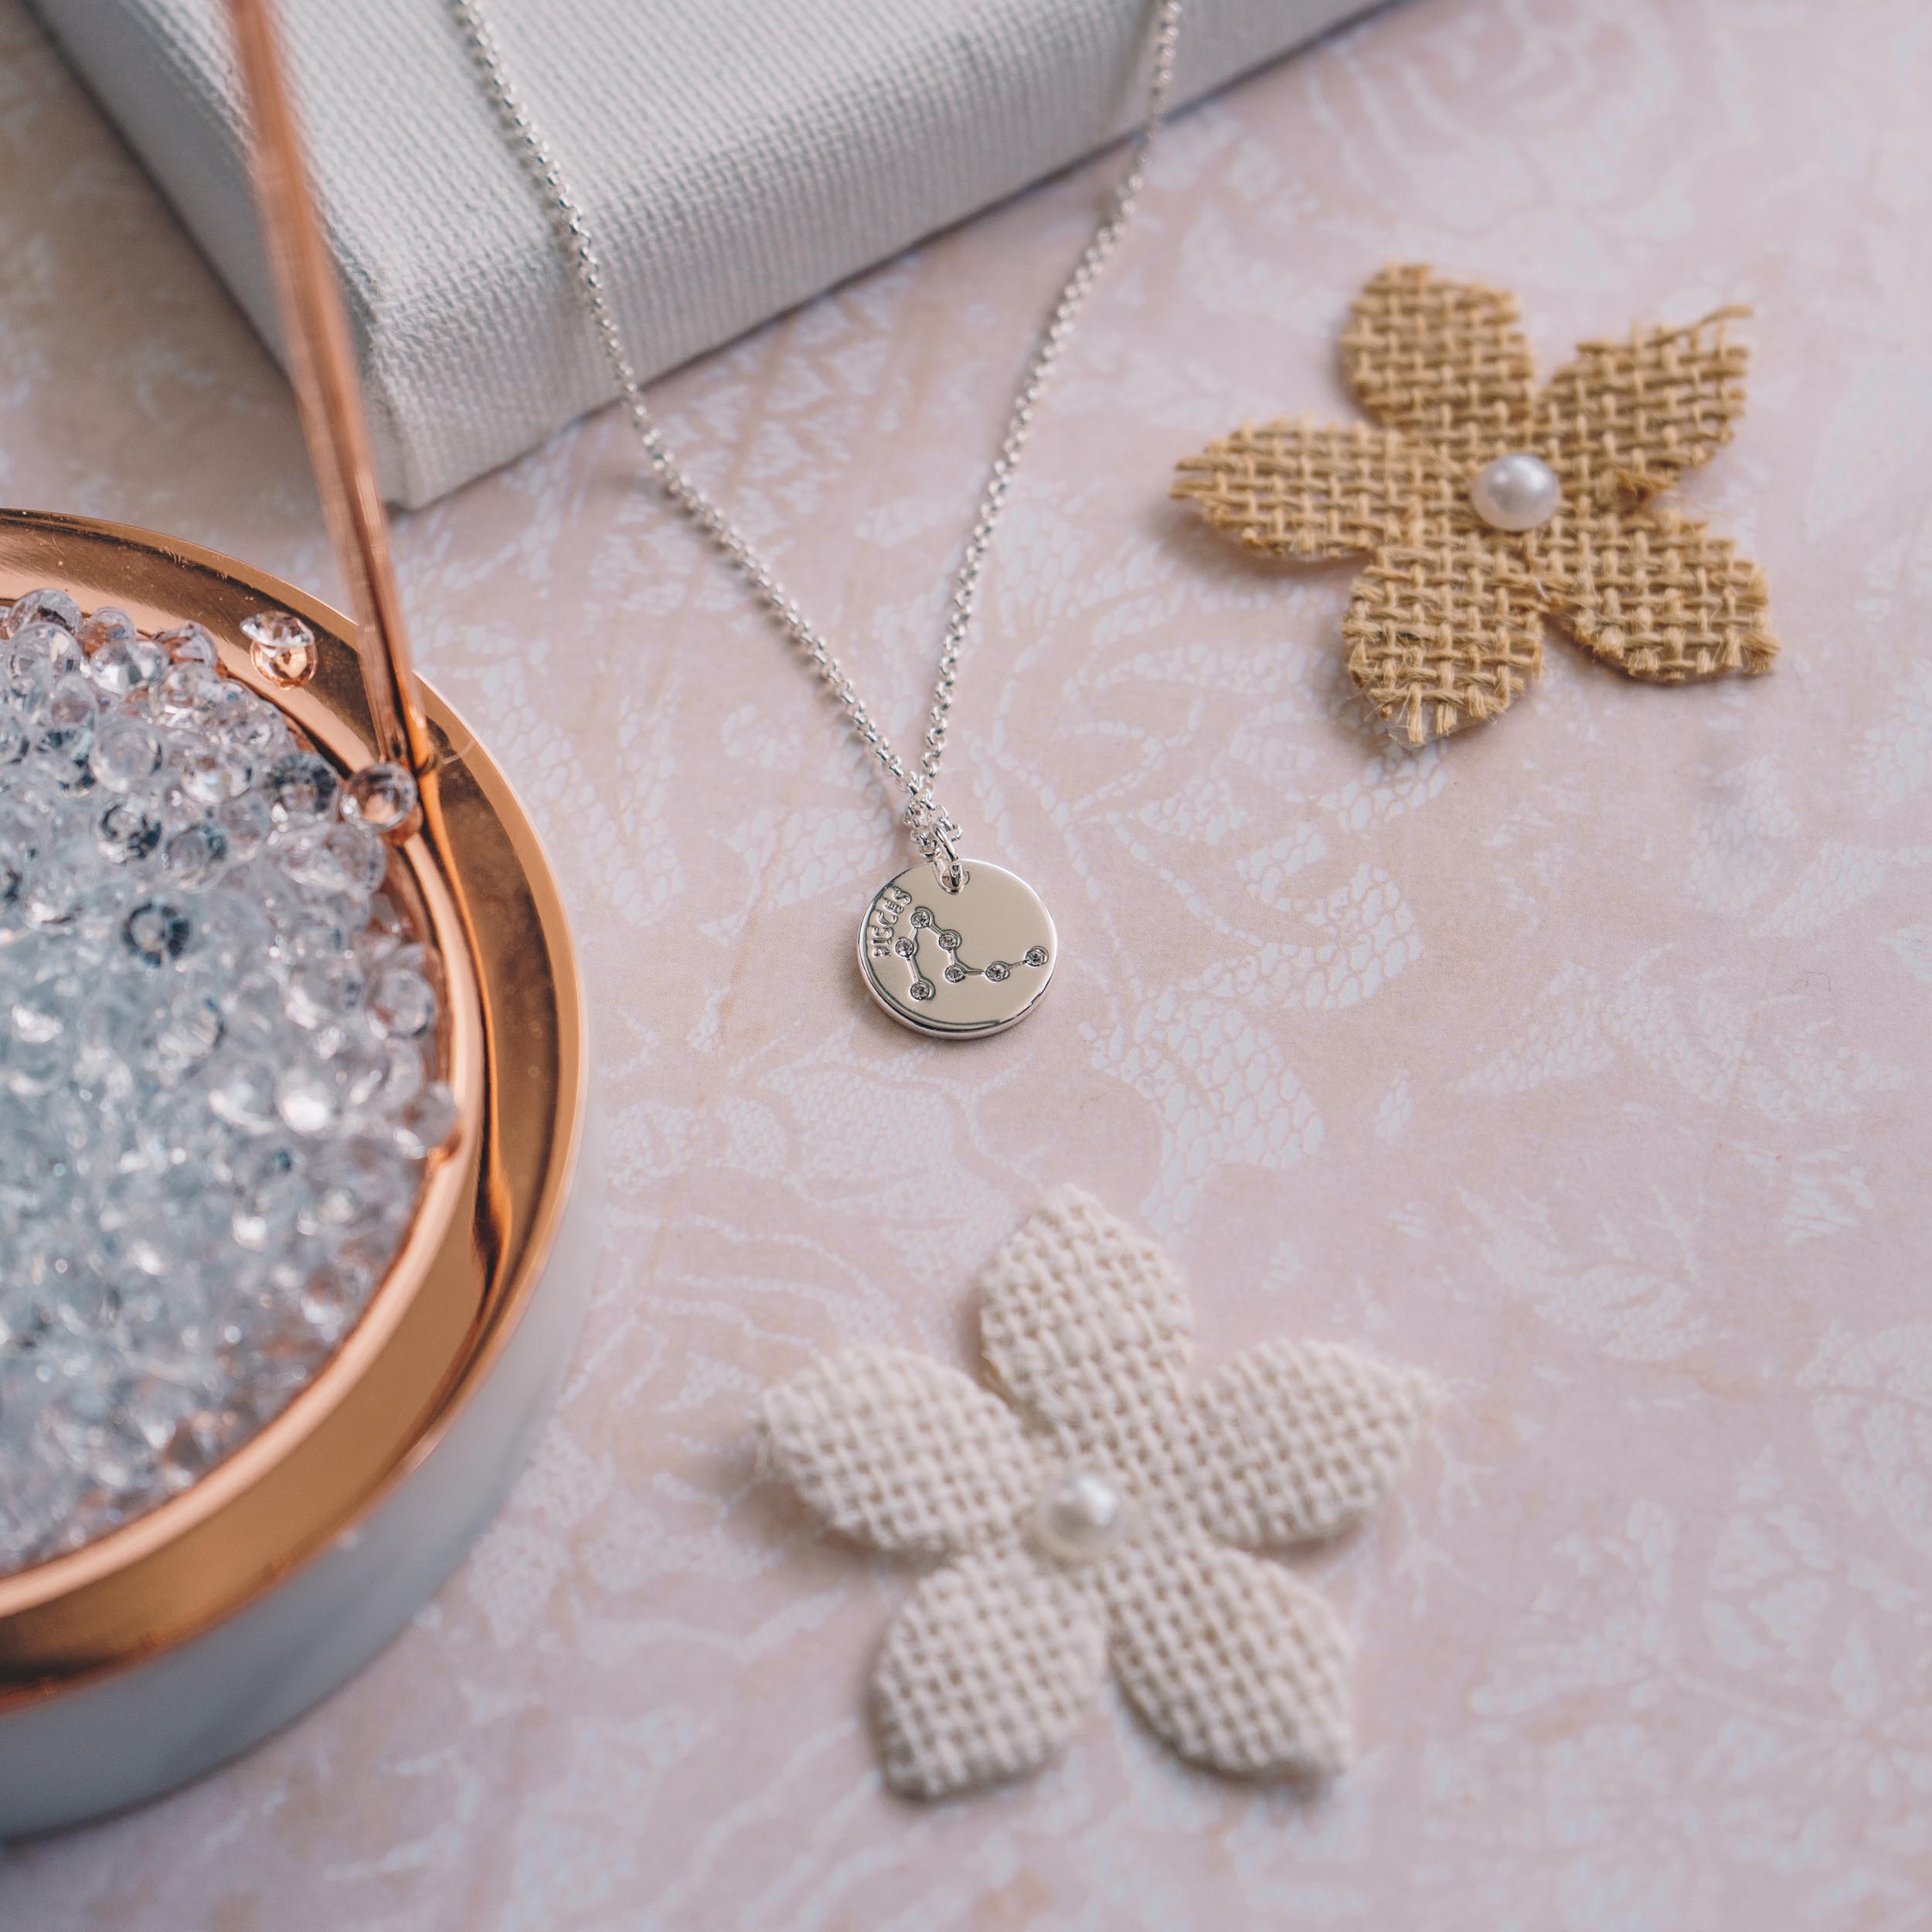 Pisces Star Sign Disc Necklace Created with Zircondia® Crystals